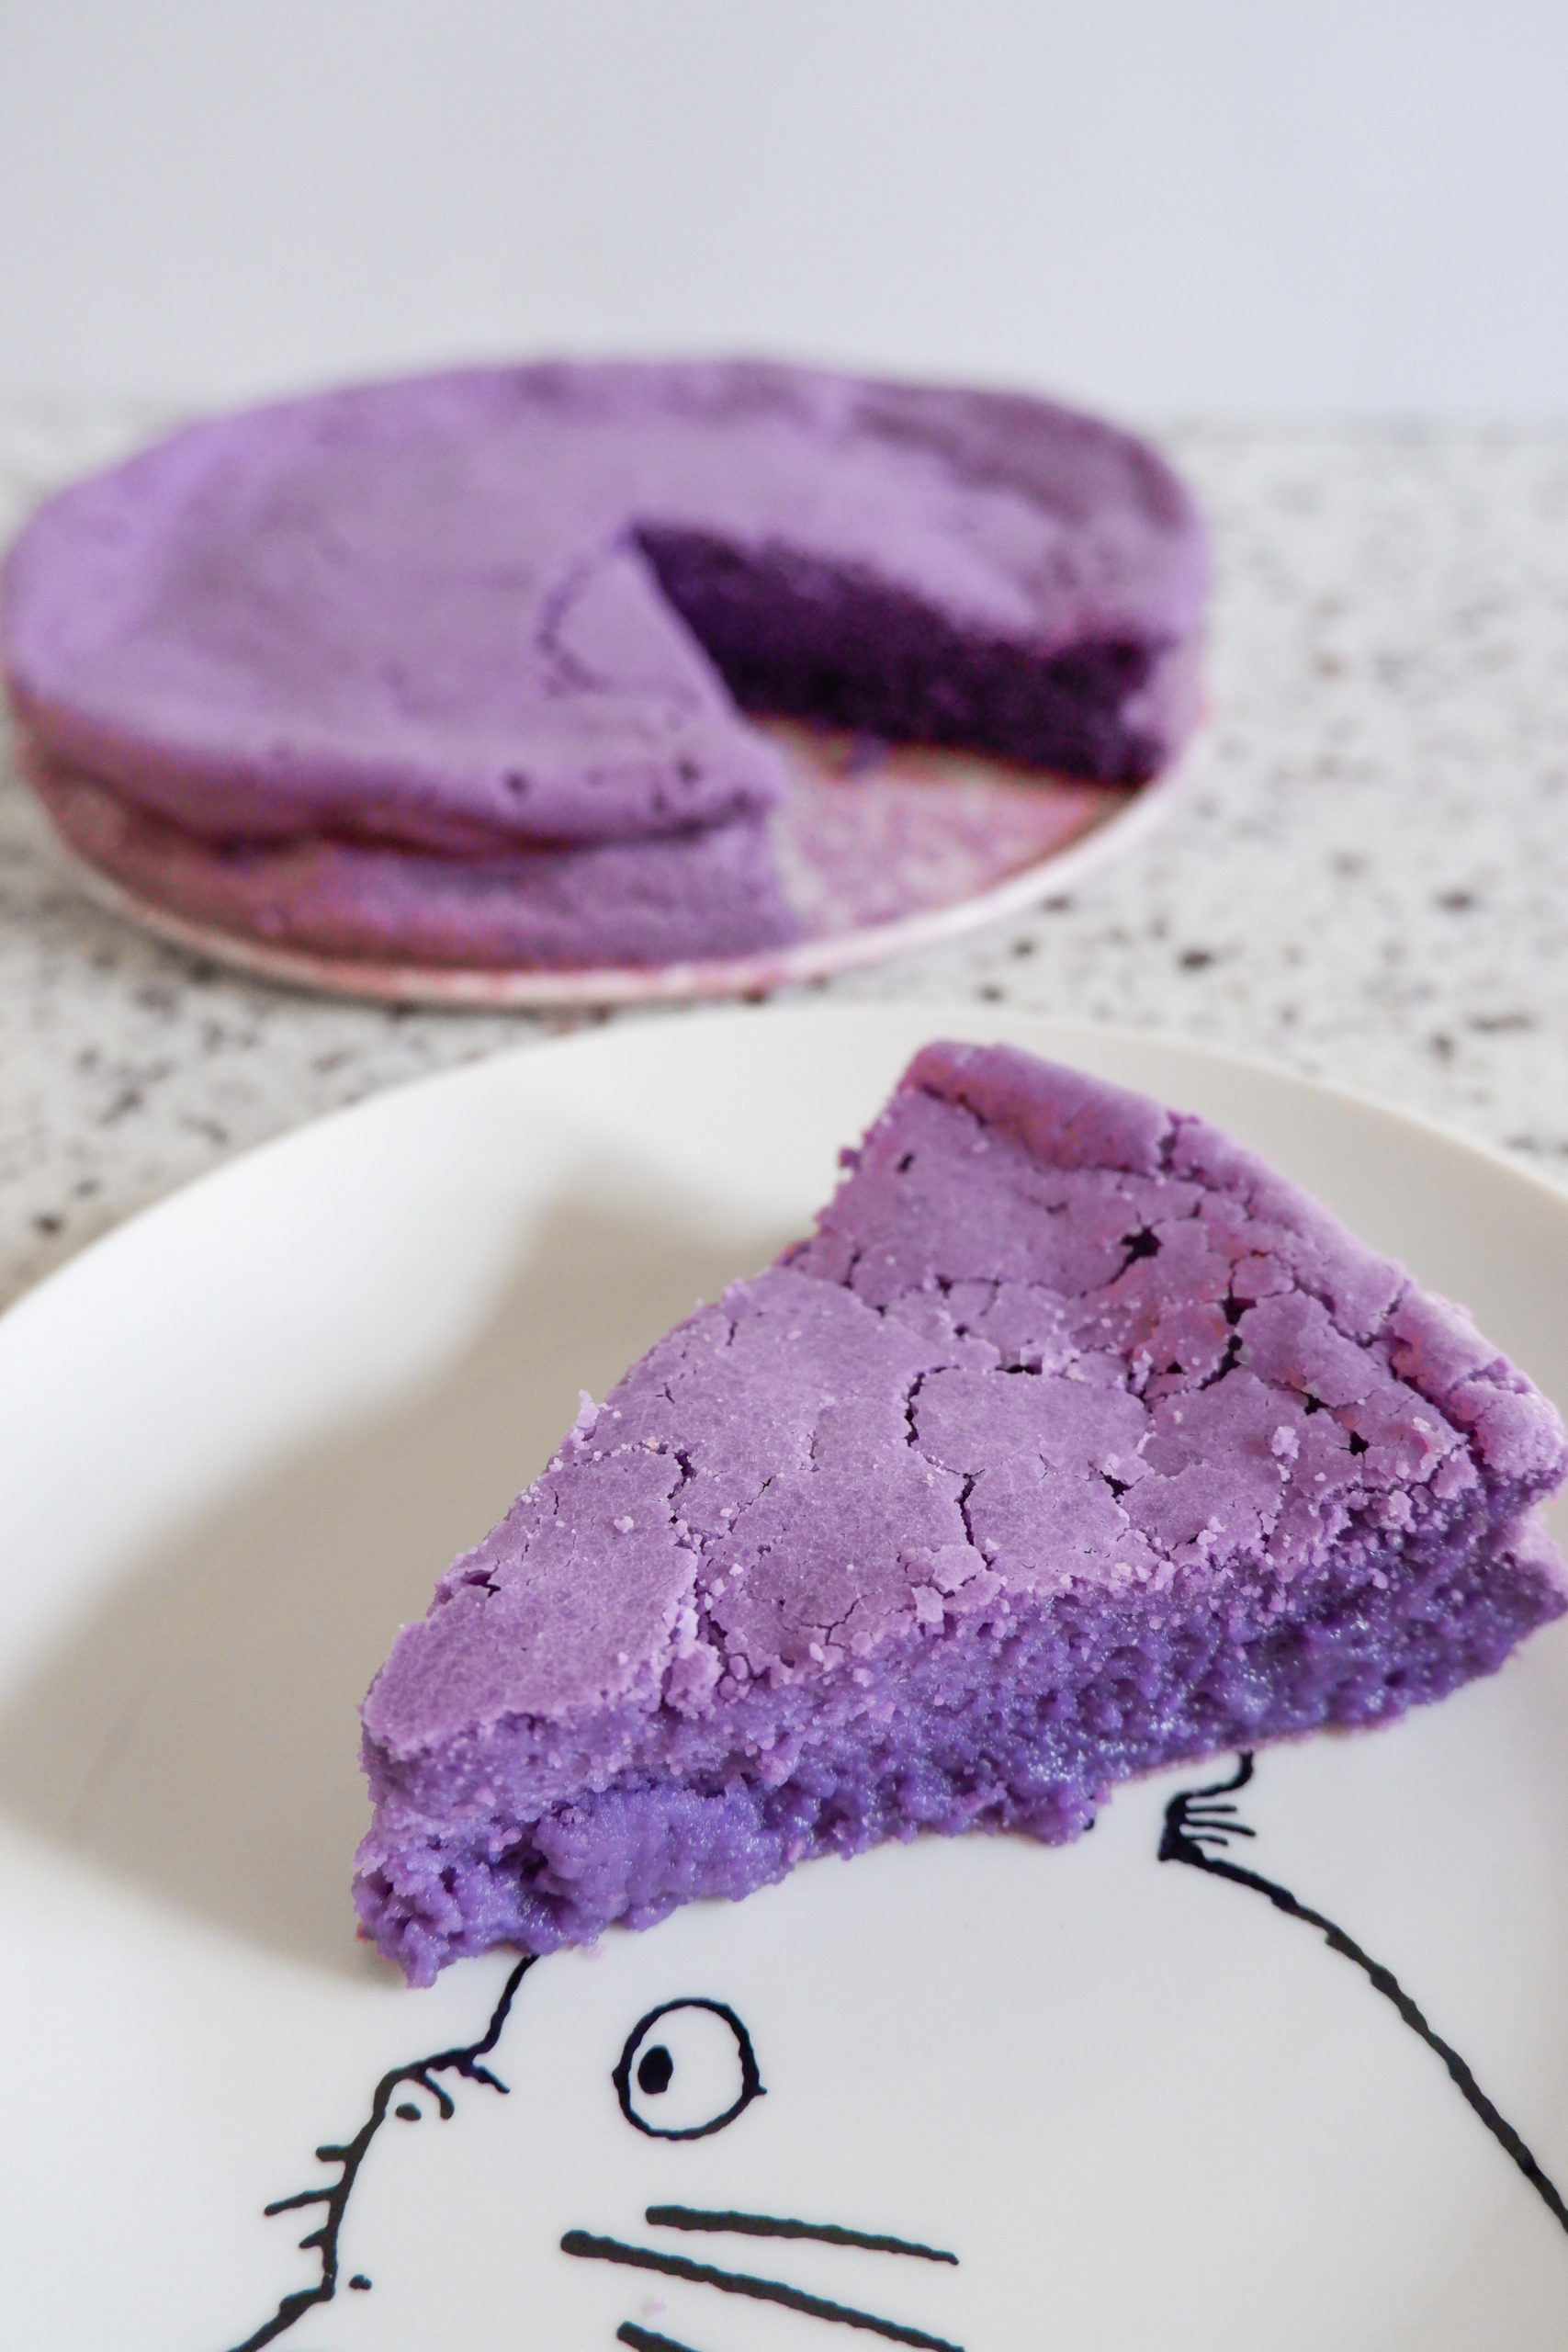 How do you get cake THIS purple : r/Baking